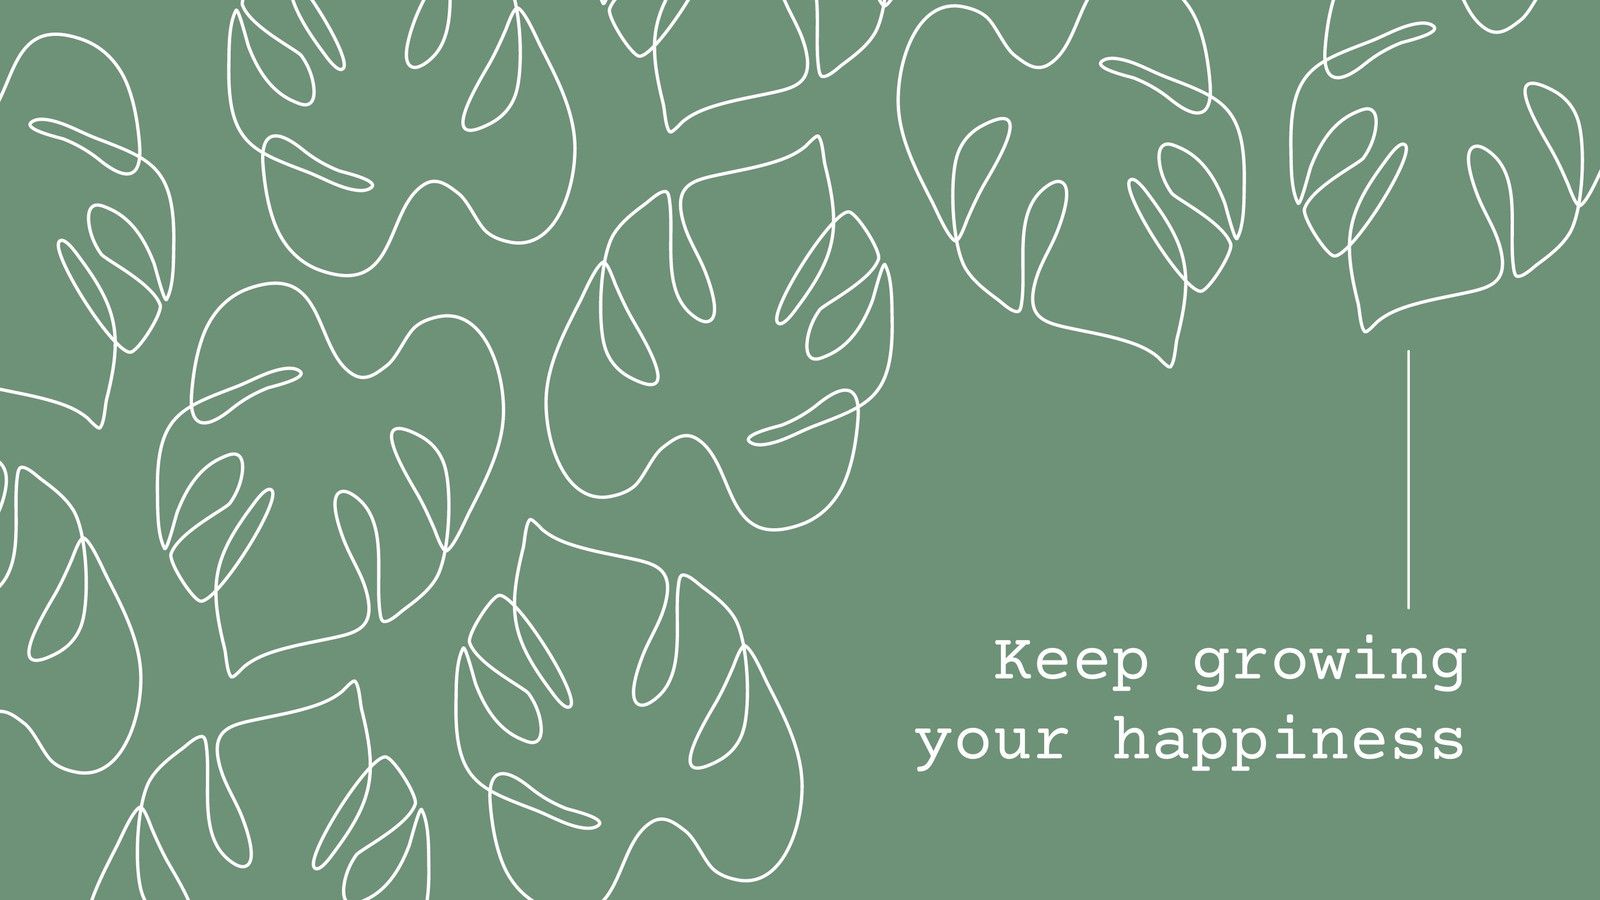 Keep growing your happiness - Sage green, green